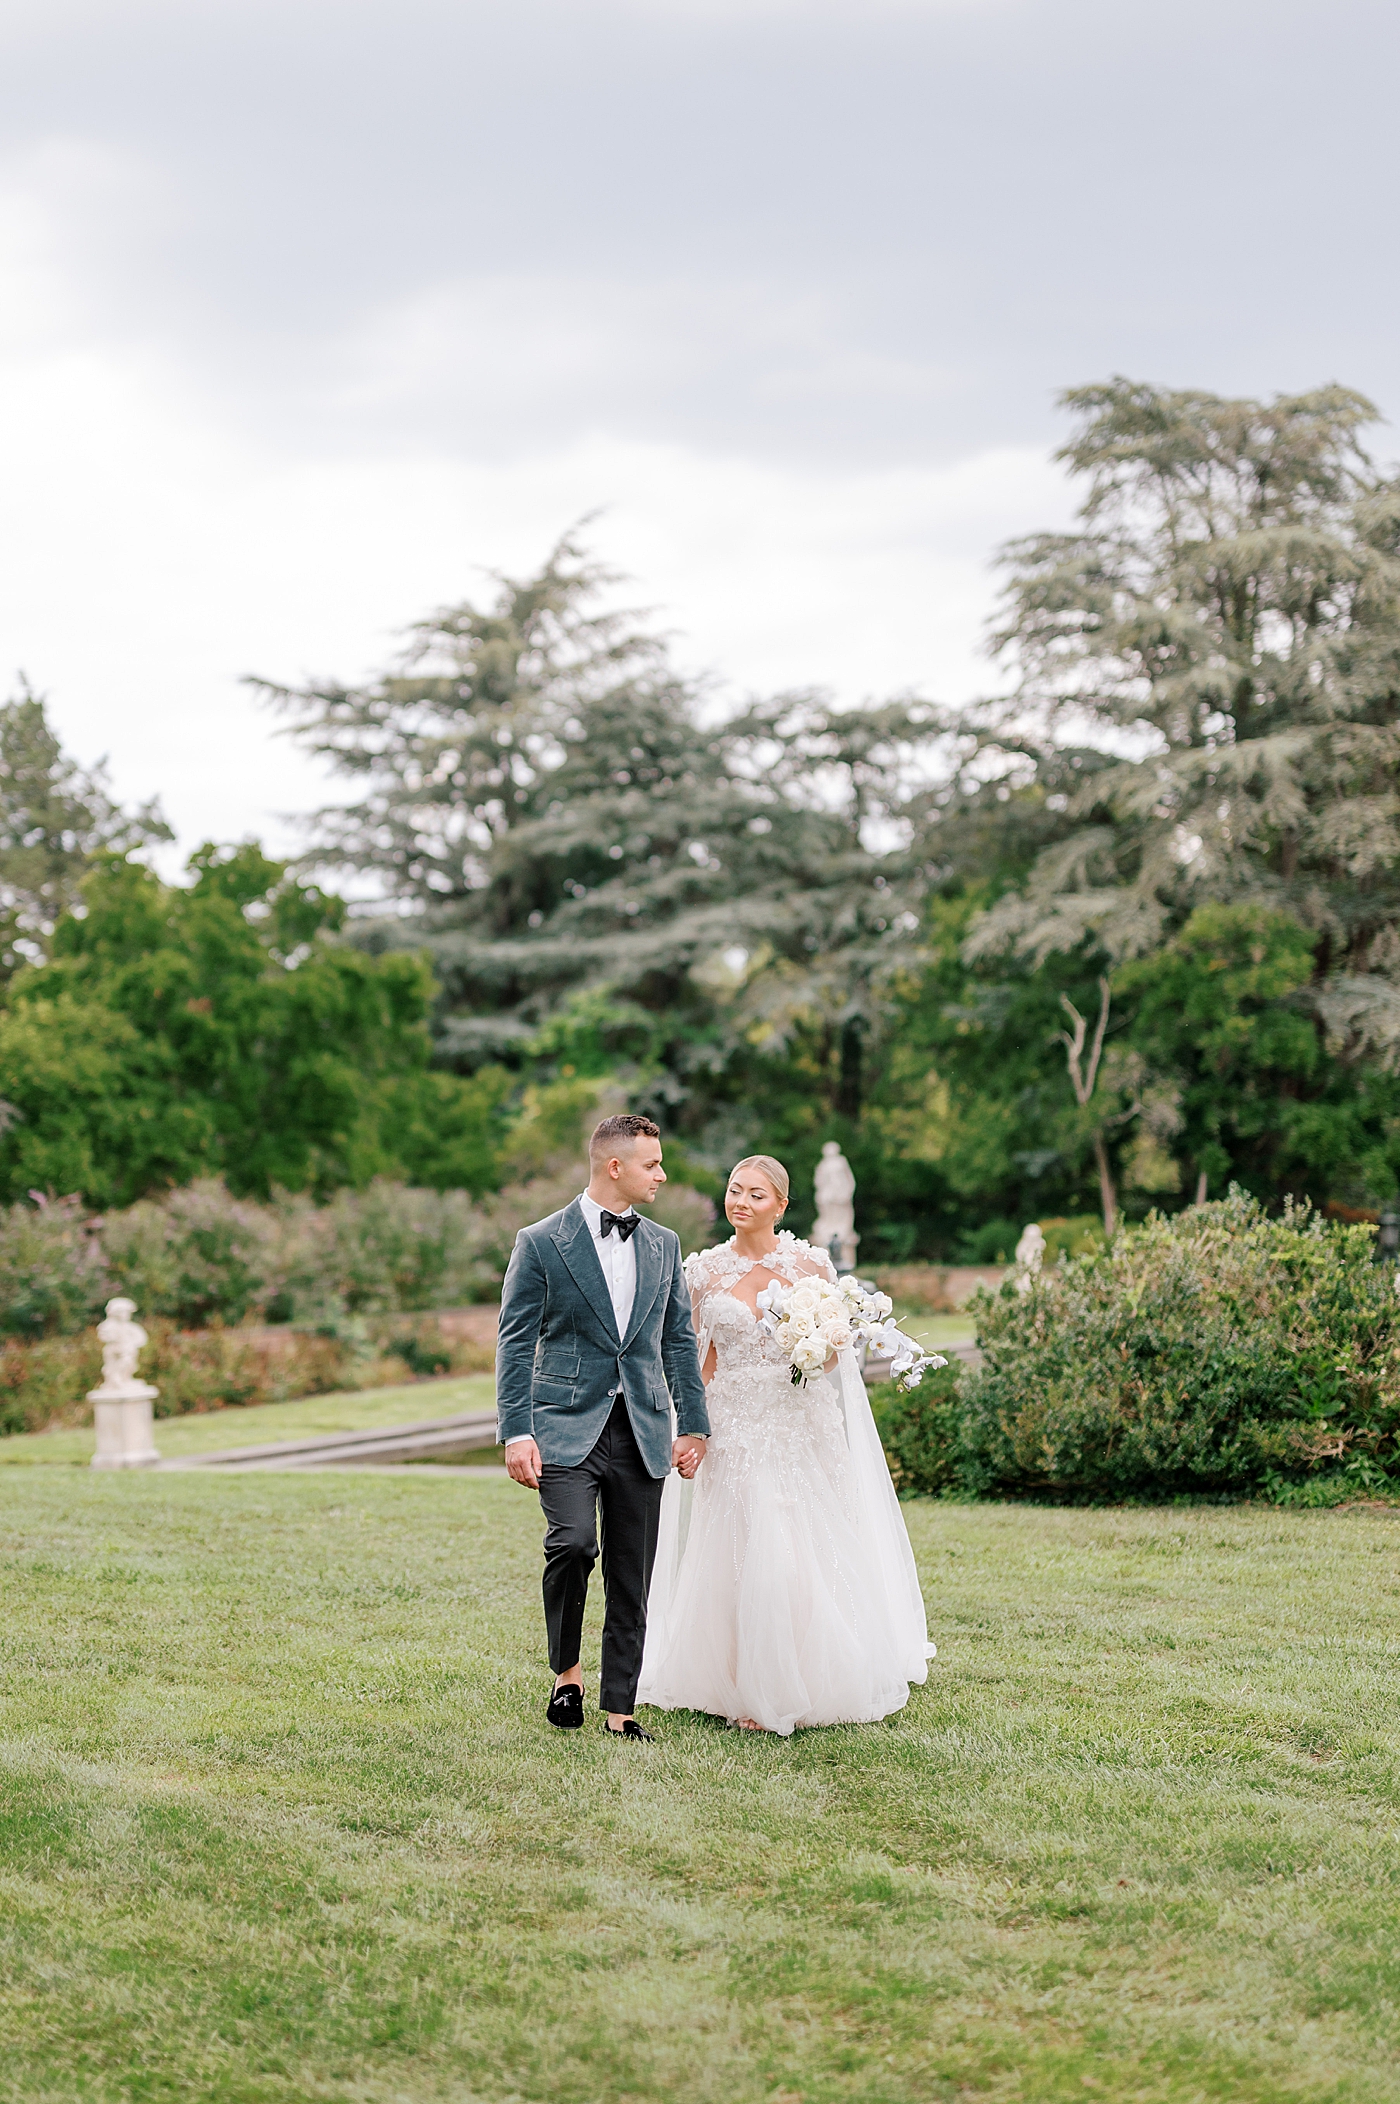 Bride and groom walking through a garden | Image by Hope Helmuth Photography